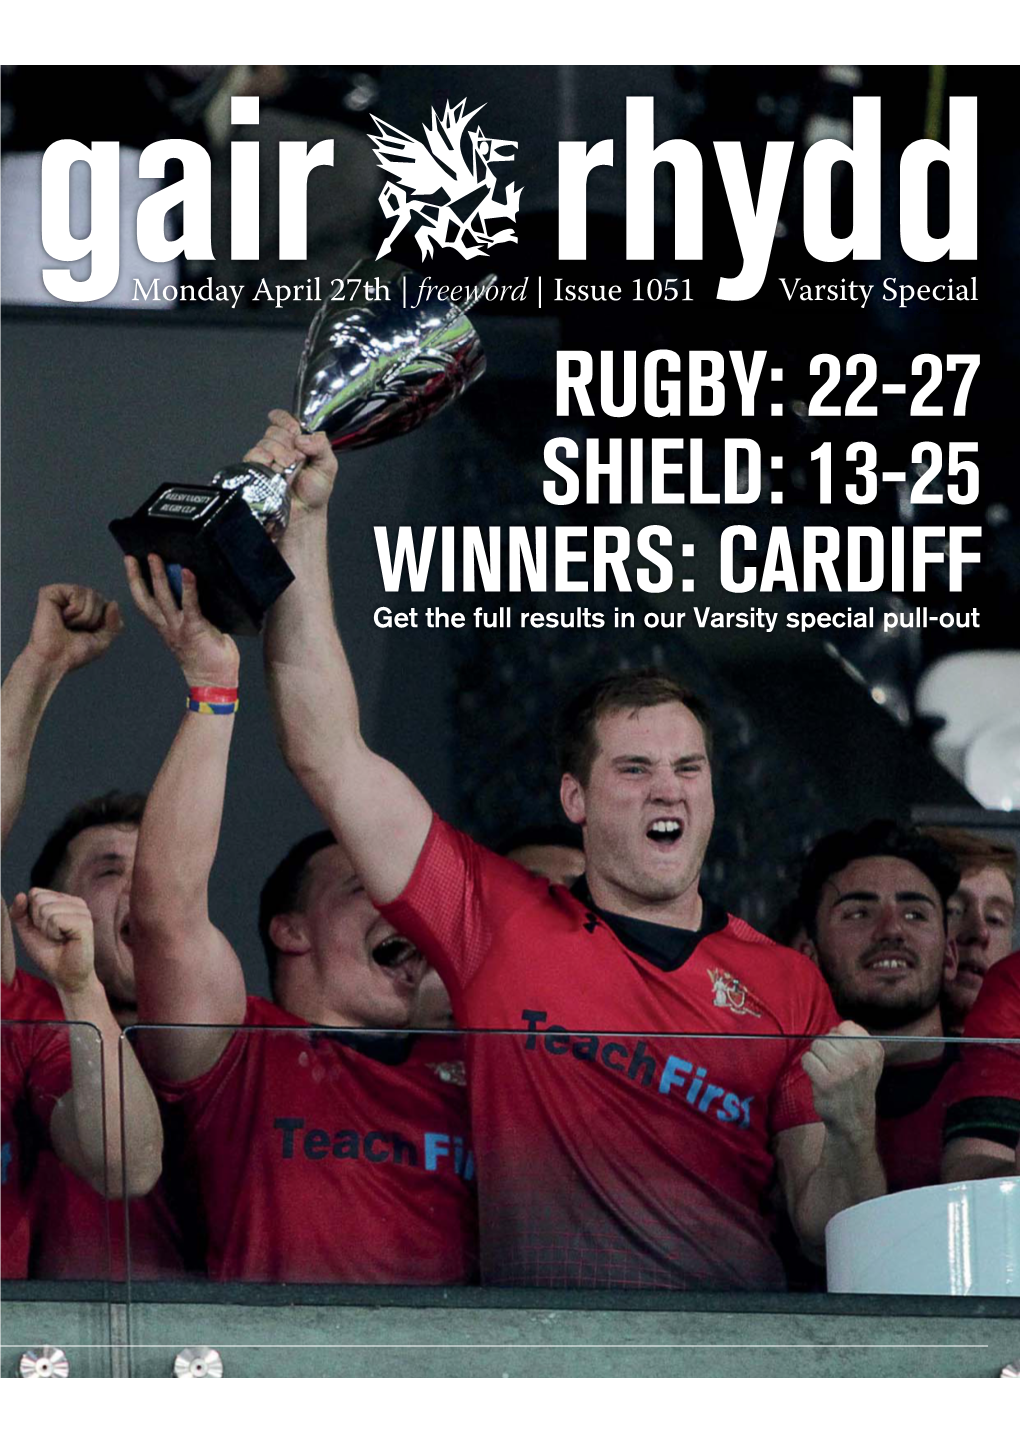 RUGBY: 22-27 SHIELD: 13-25 WINNERS: CARDIFF Get the Full Results in Our Varsity Special Pull-Out the FREE WORD